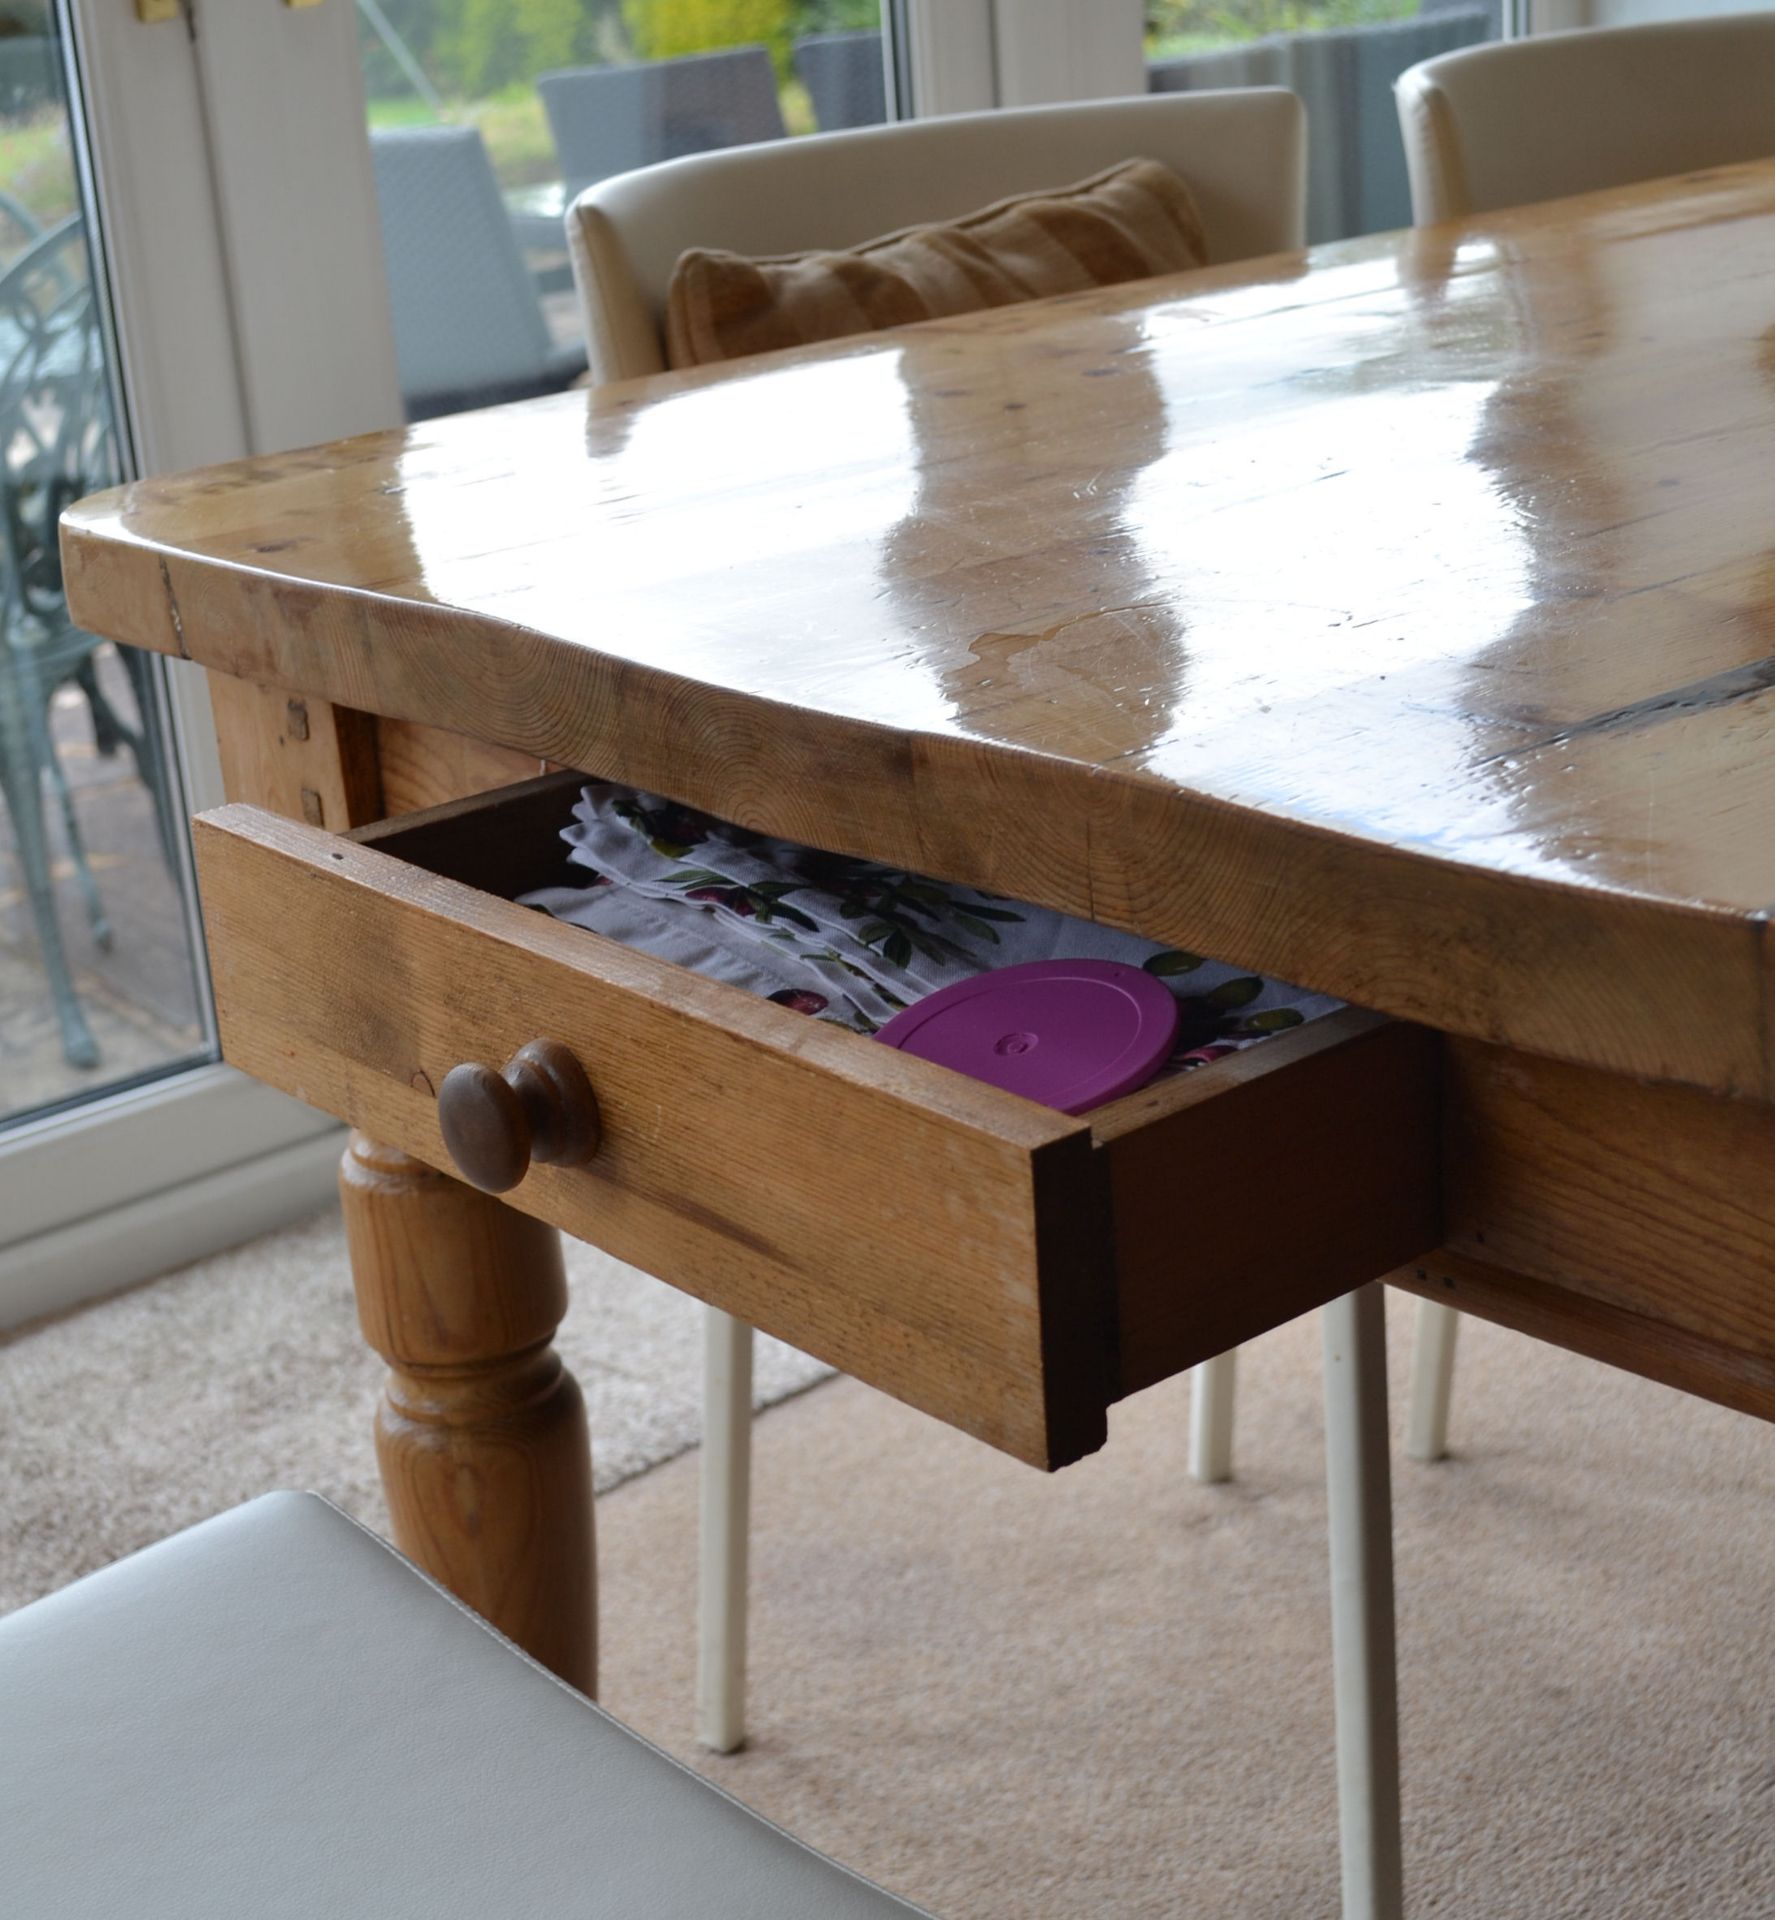 1 x Bespoke Pine Dining Table Made From Reclaimed Church Pews - CL226 - Location: Knutsford WA16 - Image 7 of 9